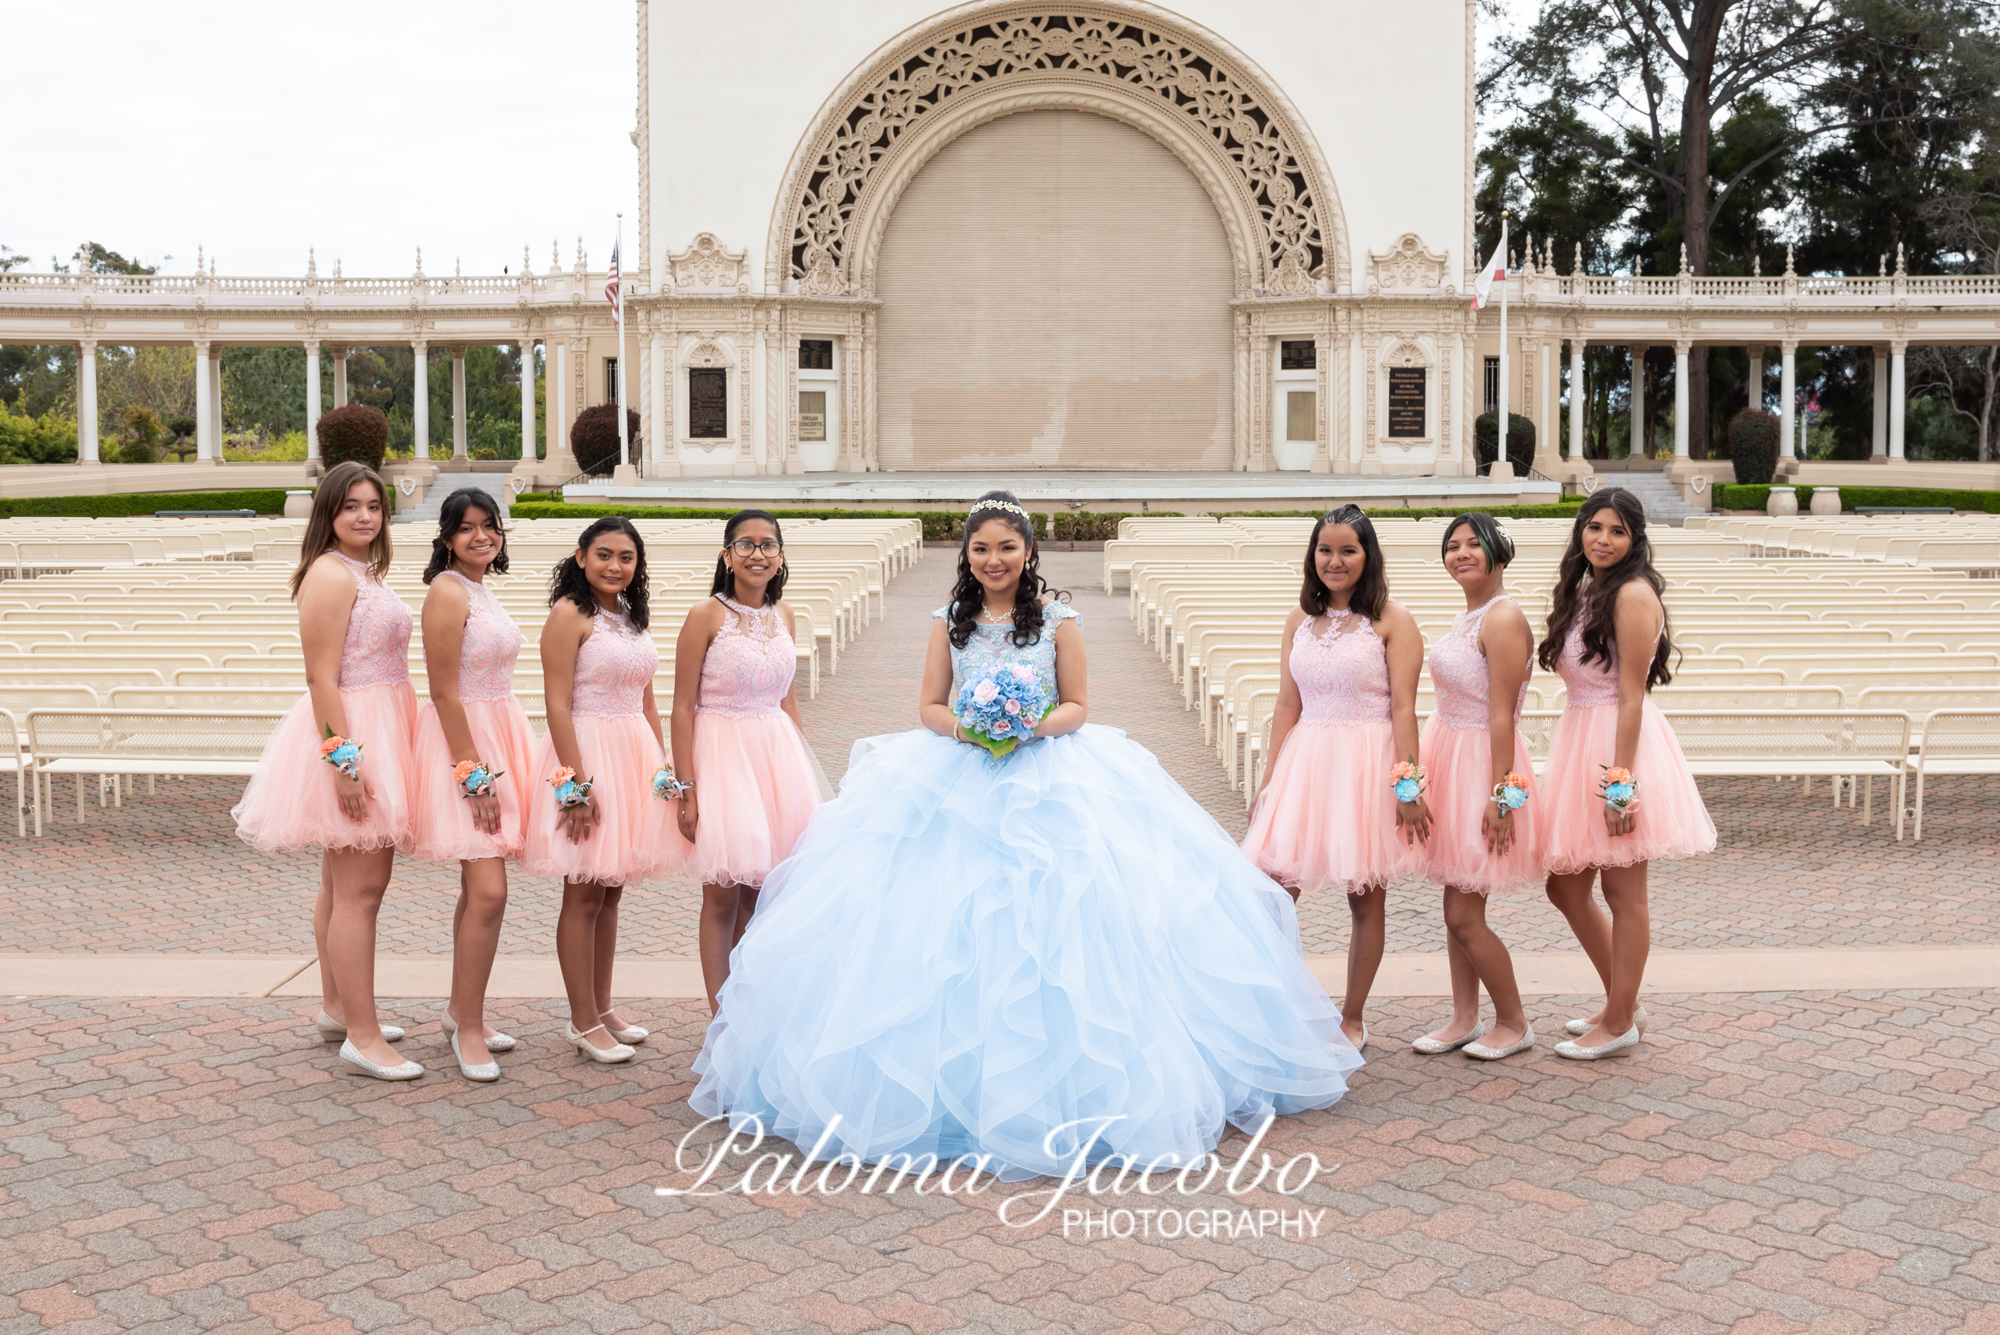 Quinceanera photo shoot with Damas by Paloma Jacobo Photography